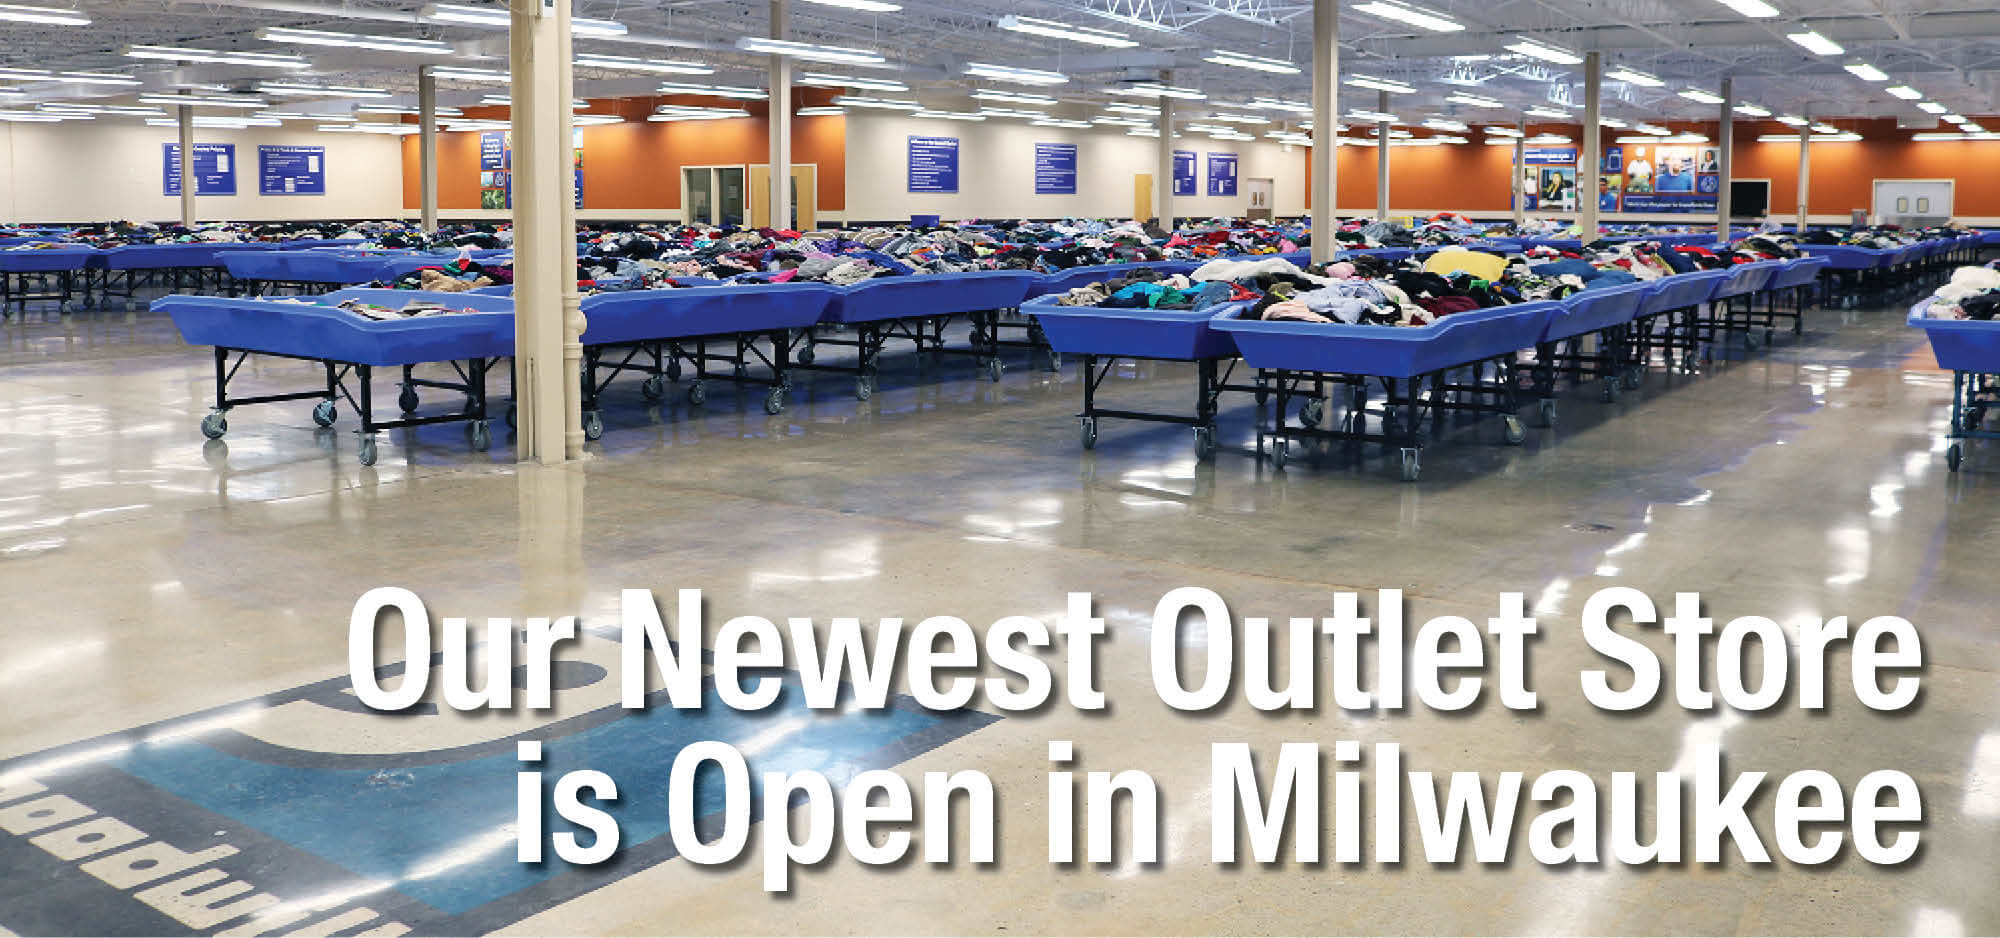 Goodwill Industries of Southeastern Wisconsin